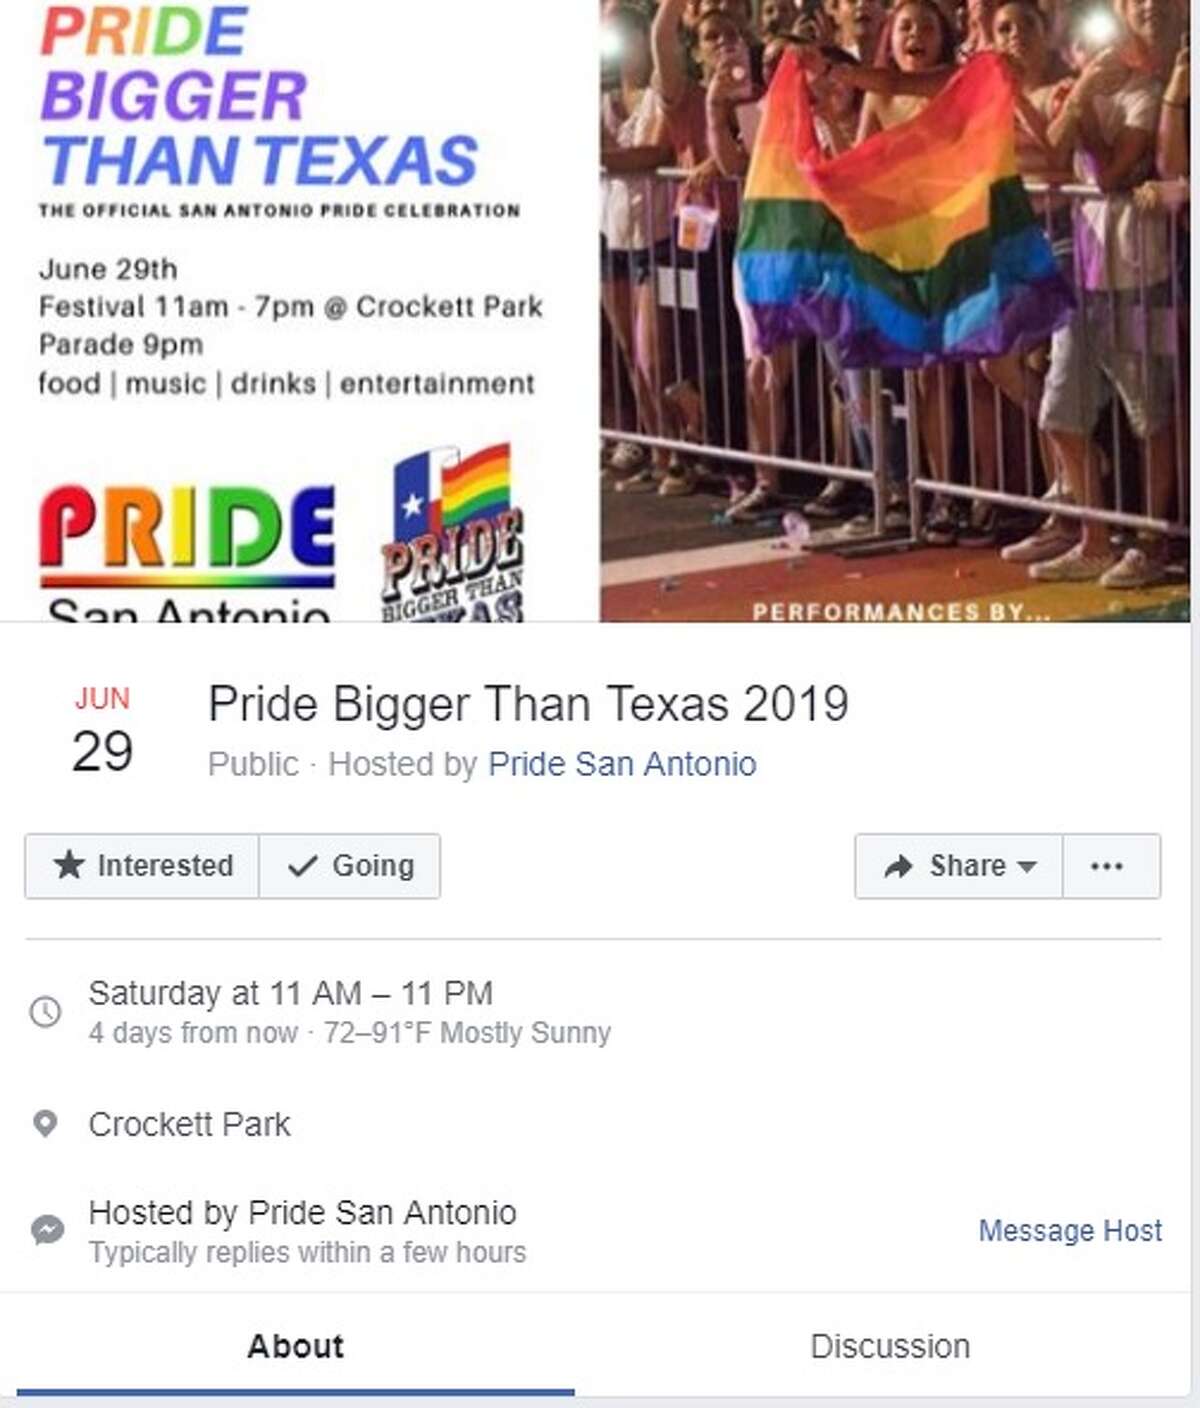 Pride Bigger Than Texas is the official San Antonio Pride Celebration. The festival runs from 11 a.m. to 11 p.m. Saturday, June 29 at Crockett Park. Parade begins at 9 p.m.